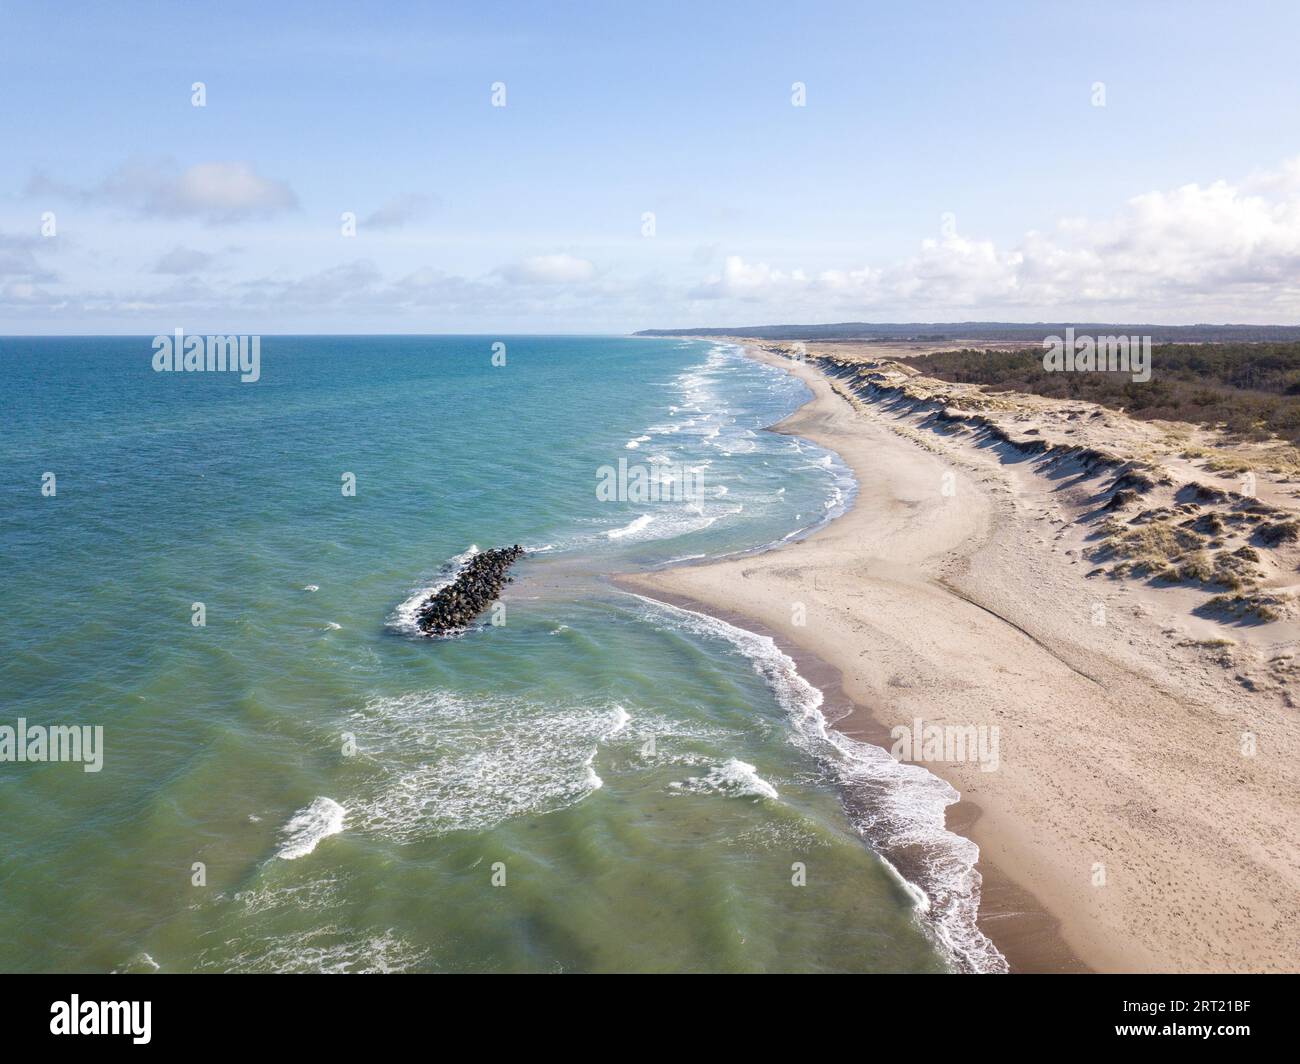 Liseleje, Denmark, April 4, 2020: Aerial drone view of a breakwater at Liseleje Beach Stock Photo